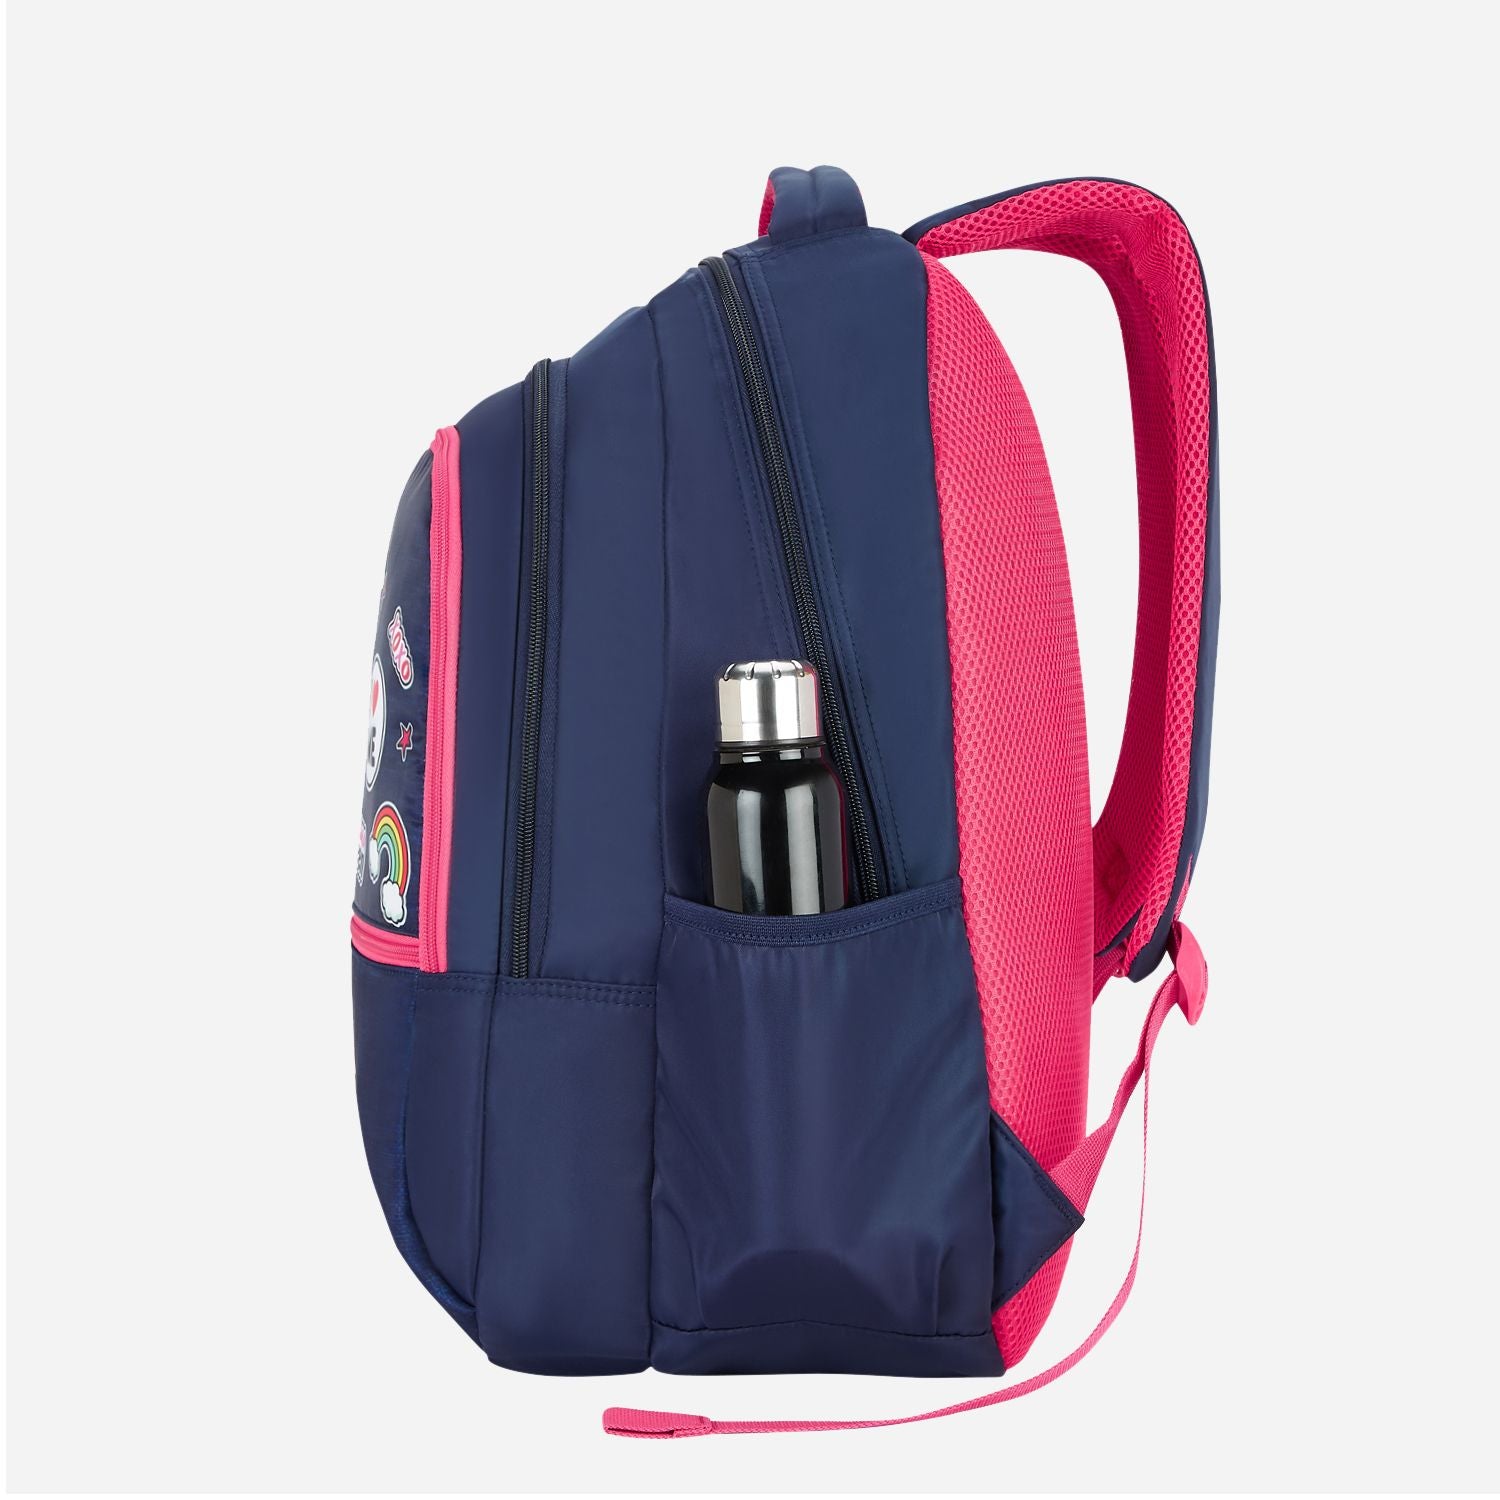 Drama Queen Laptop Backpack - Blue